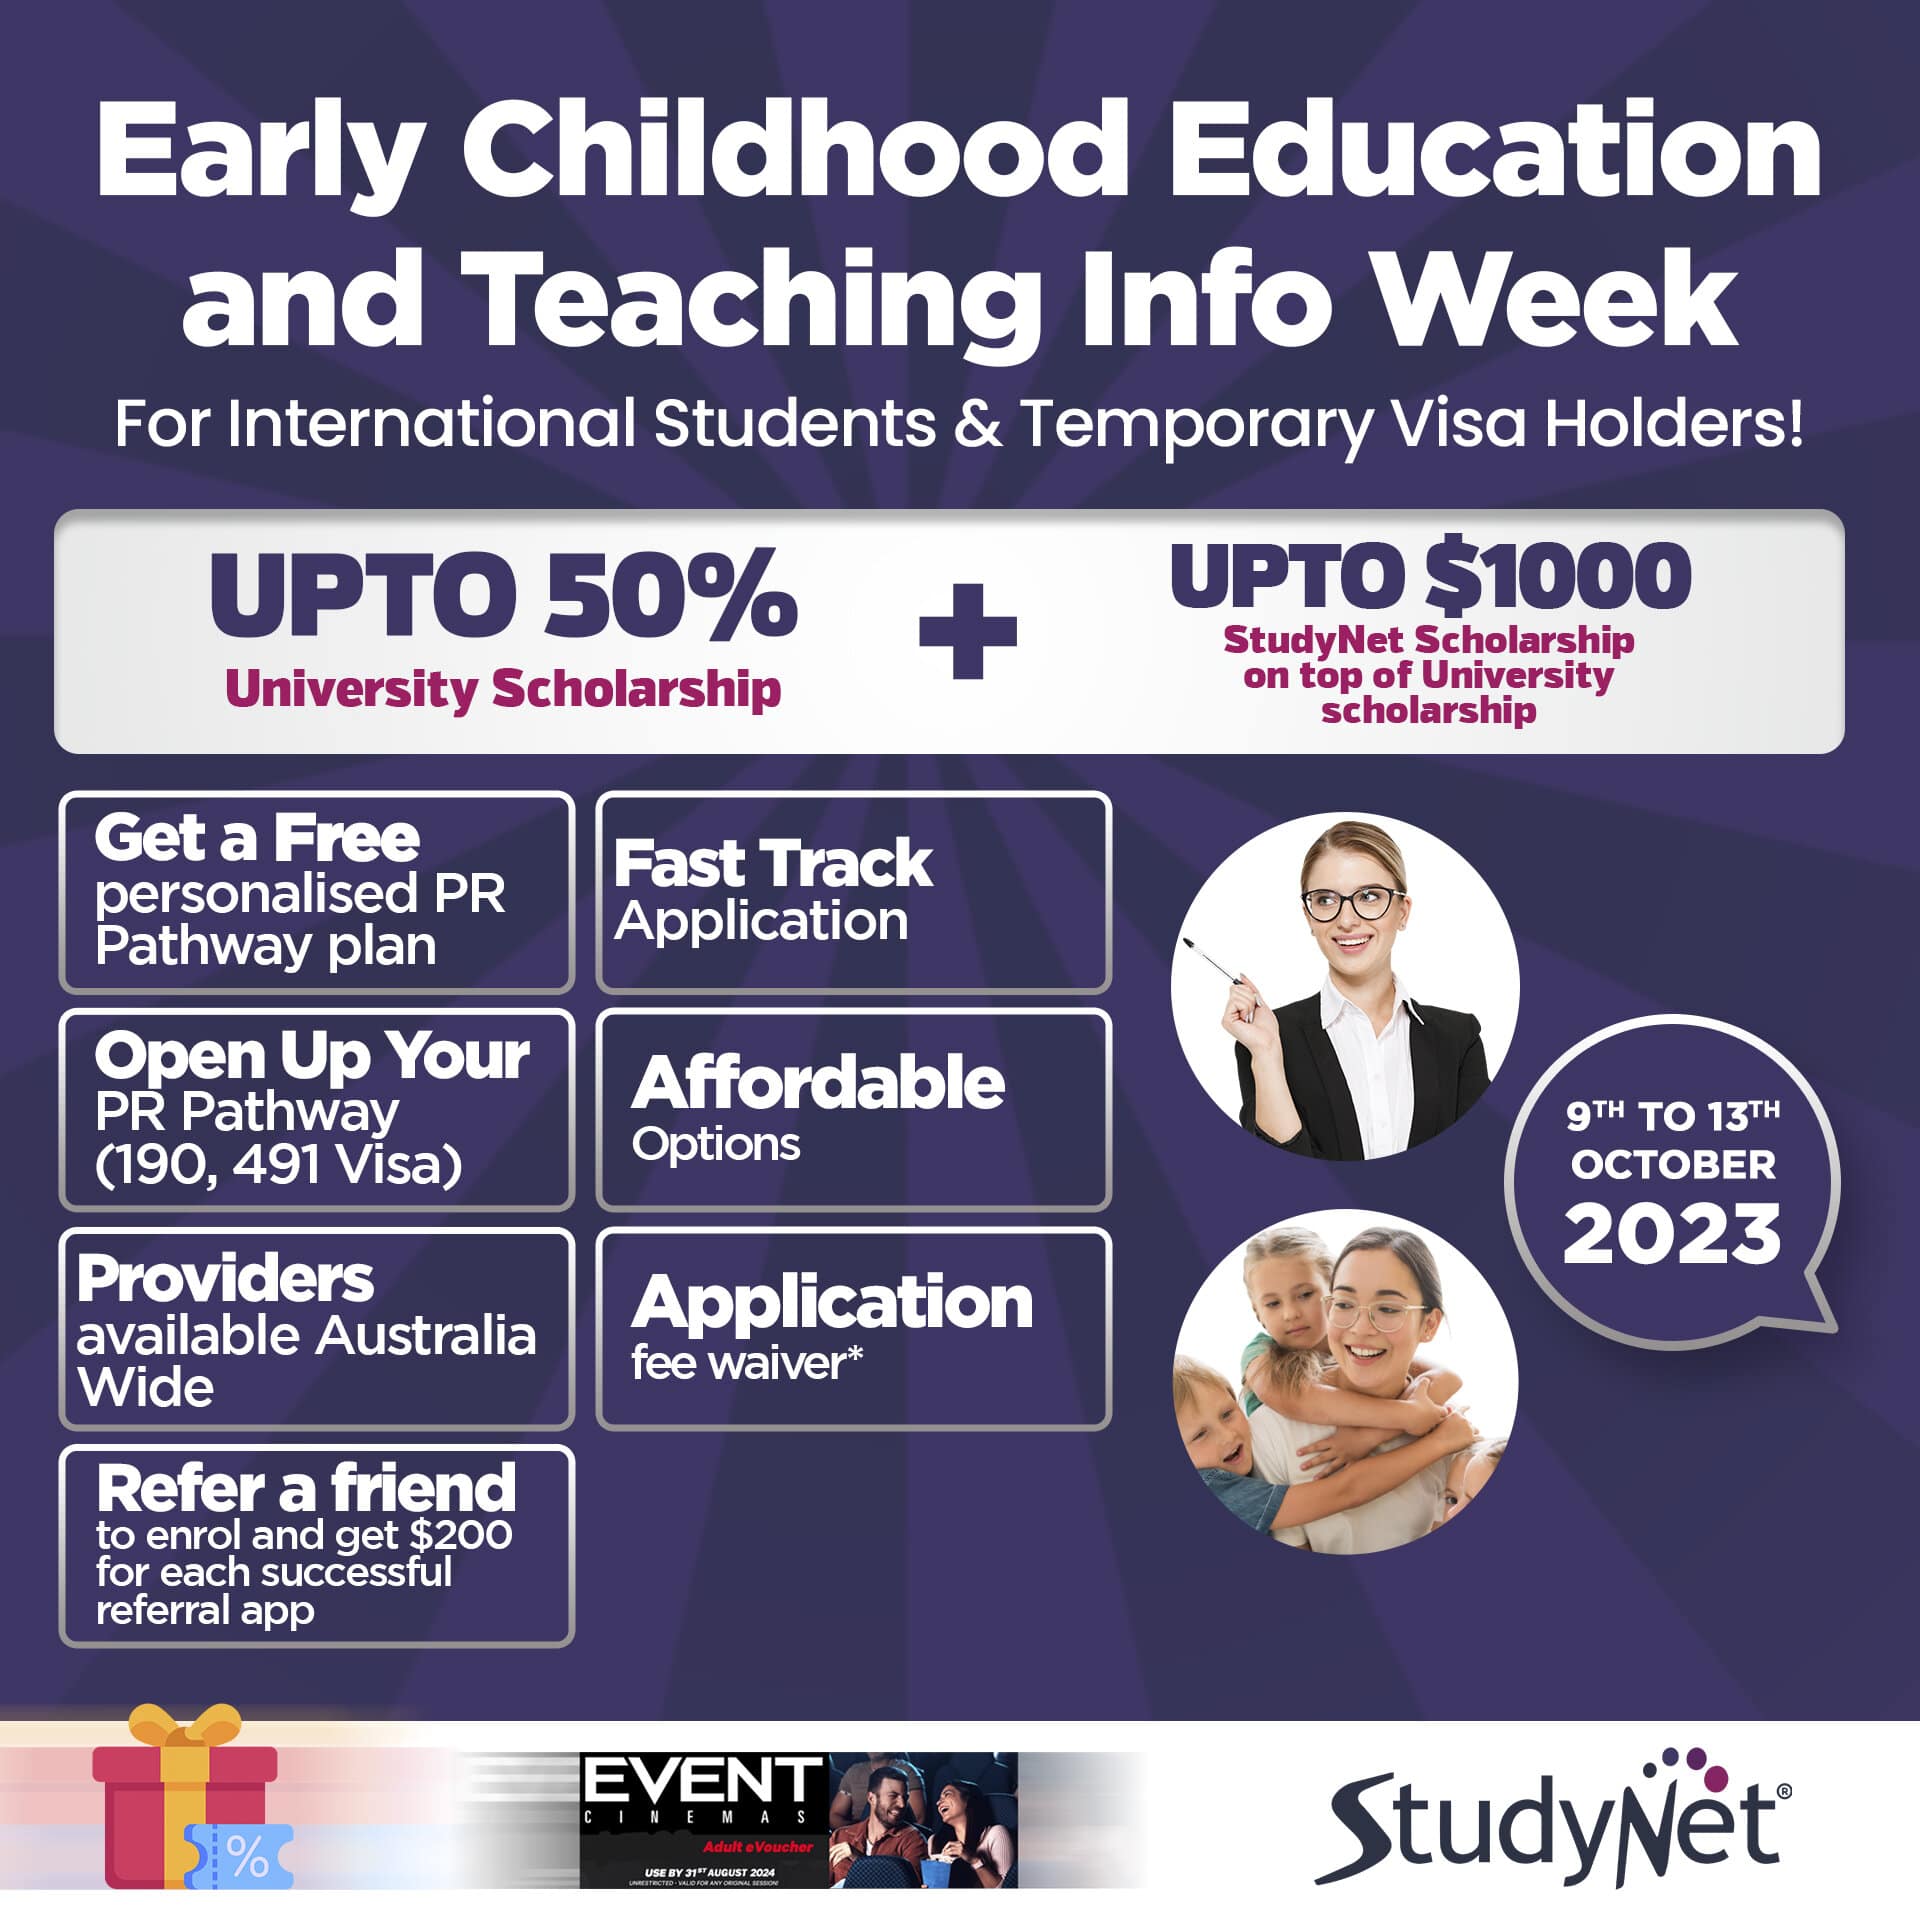 StudyNet Education and Teaching